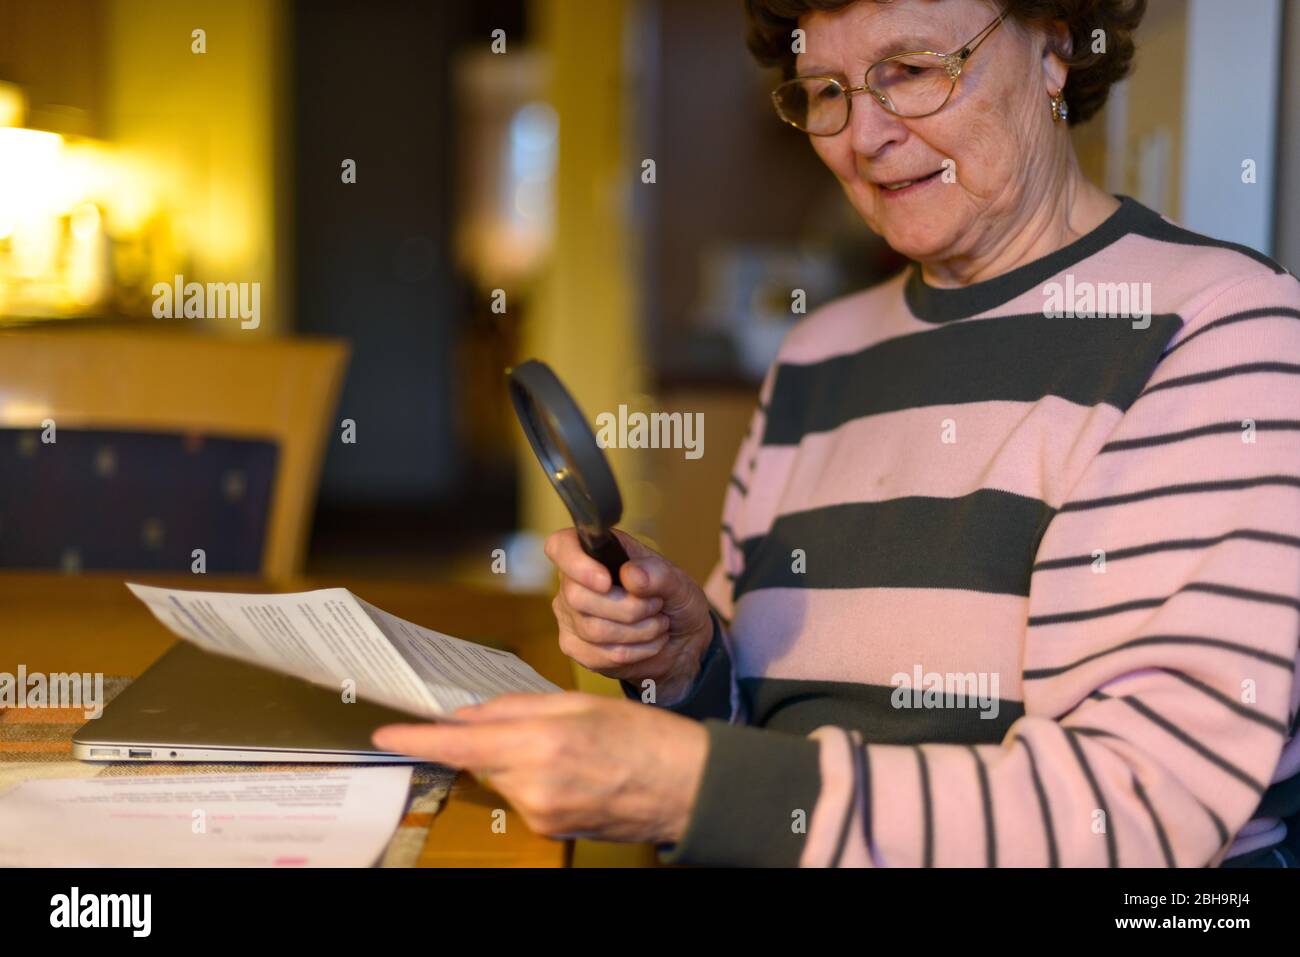 Happy senior woman smiling while reading paper with magnifying glass in the dining room Stock Photo